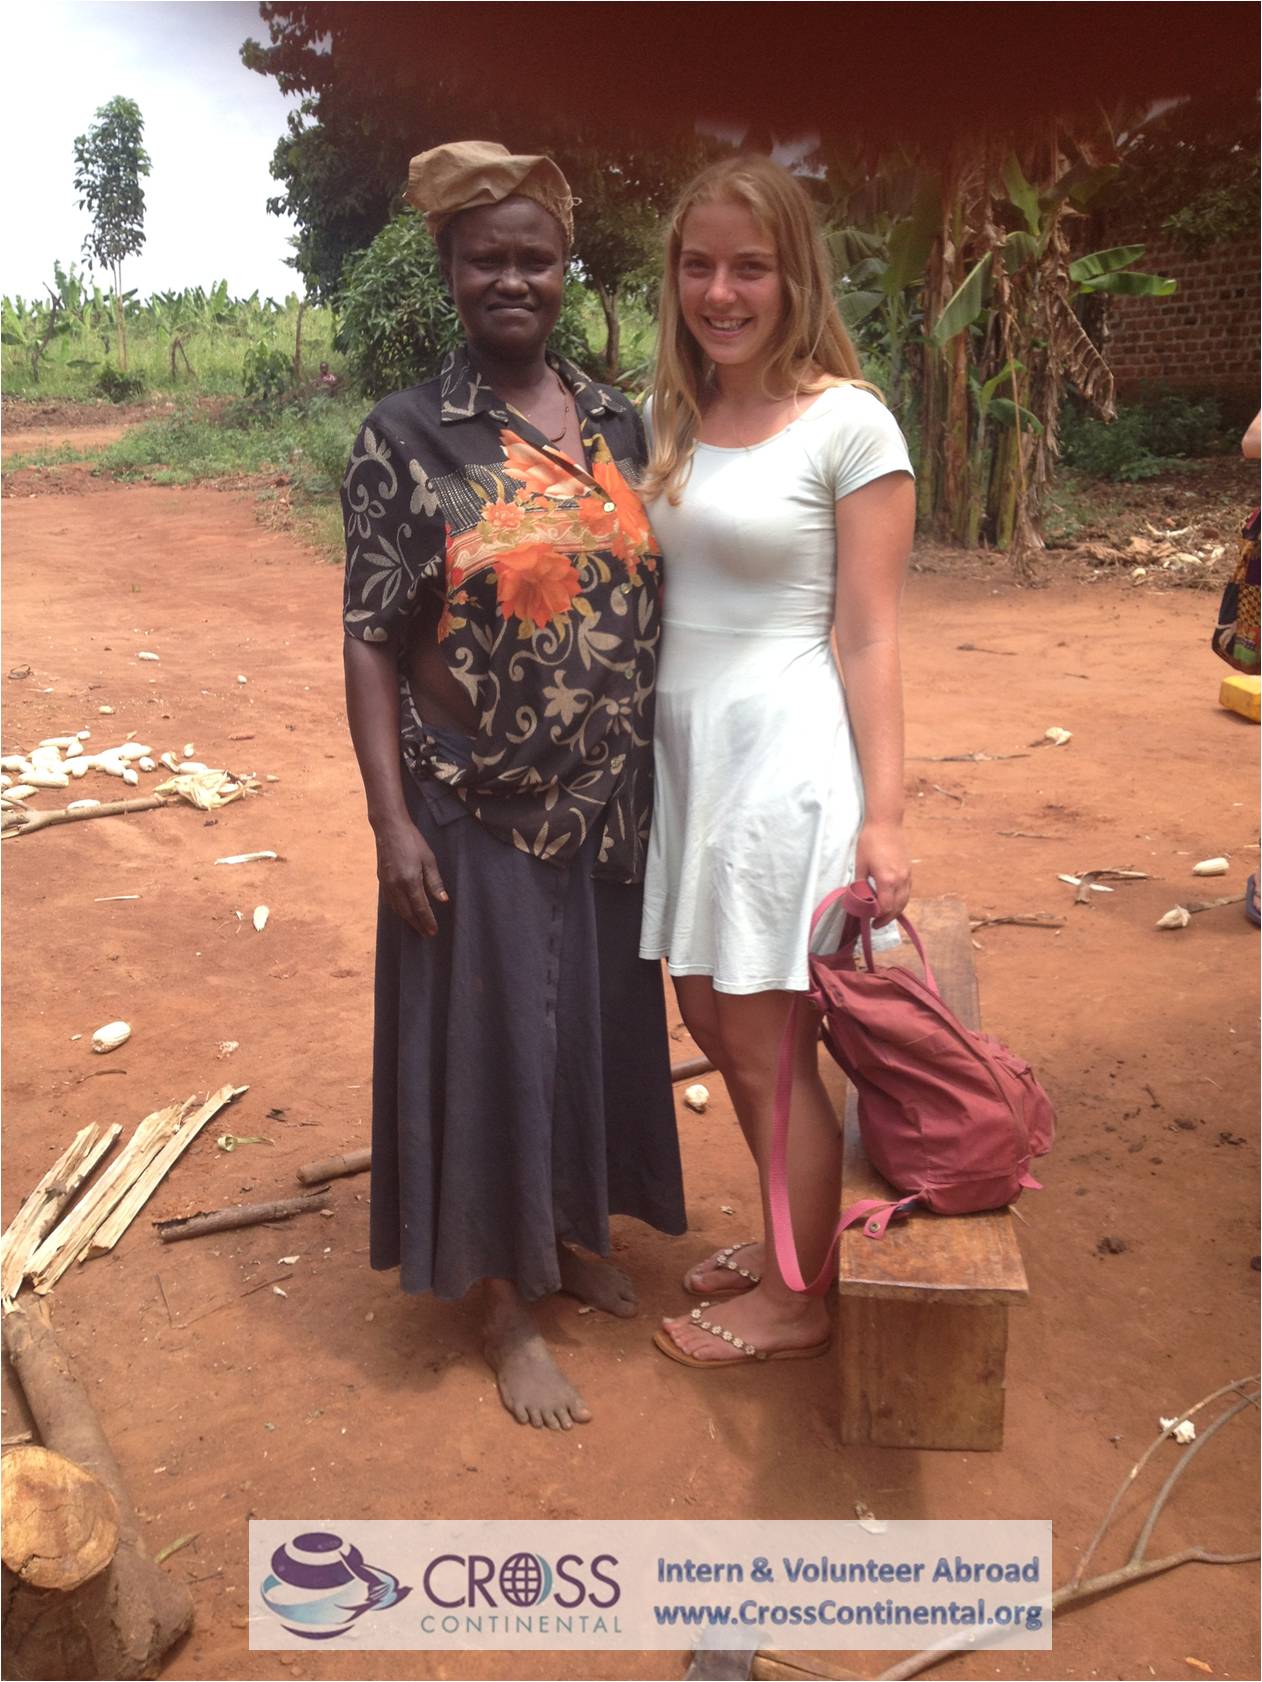 Intern or Volunteer Abroad with CrossContinental.org